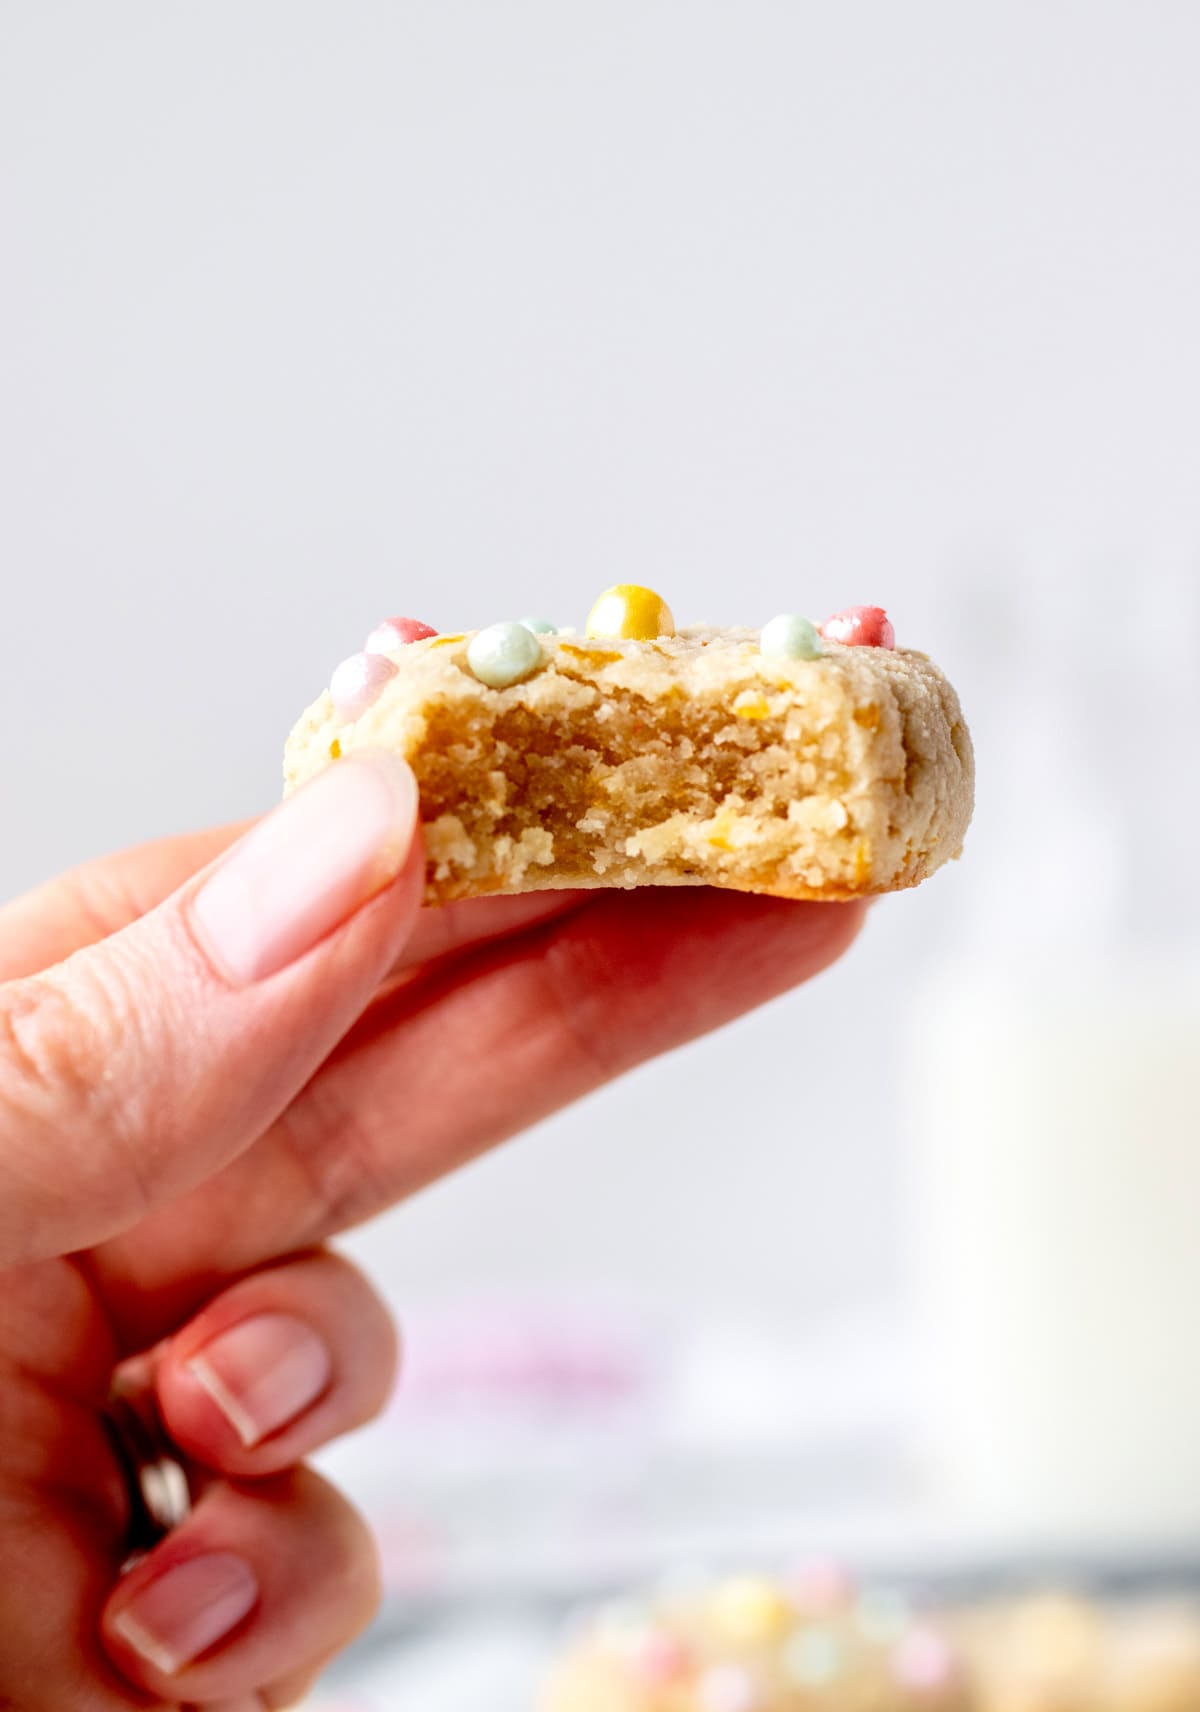 A hand holding up a vegan lemon cookie with a bite taken out of it.